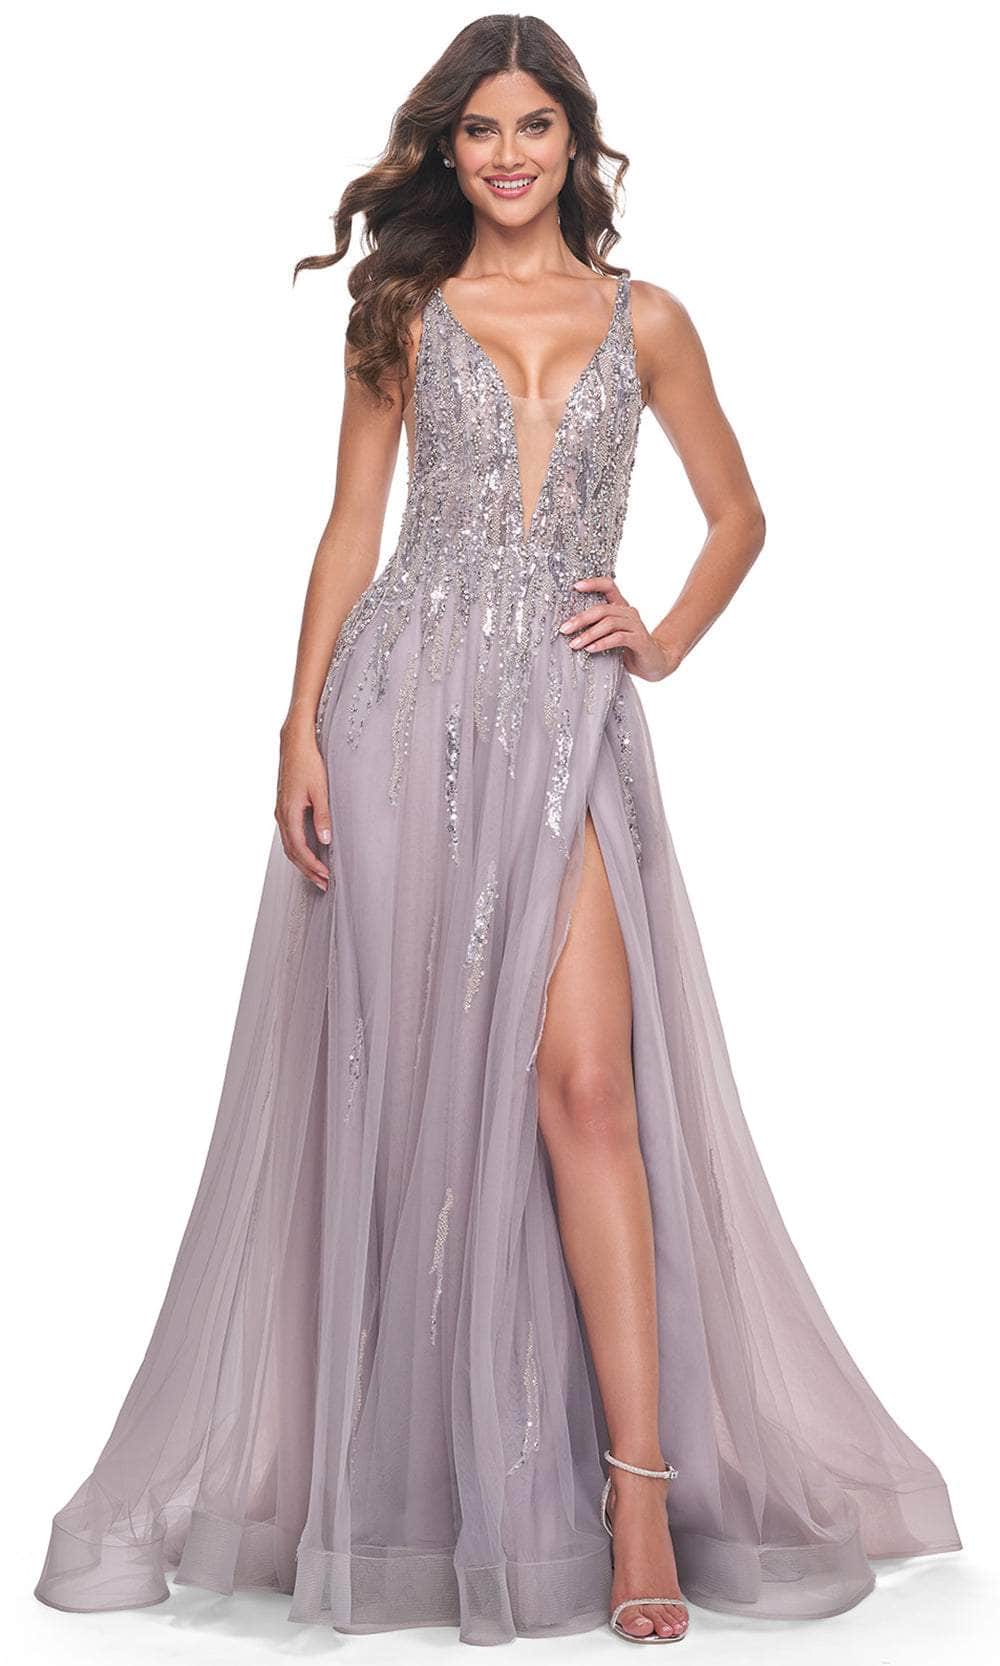 Image of La Femme 31995 - Plunging V-Neck Sequin Tulle Prom Gown